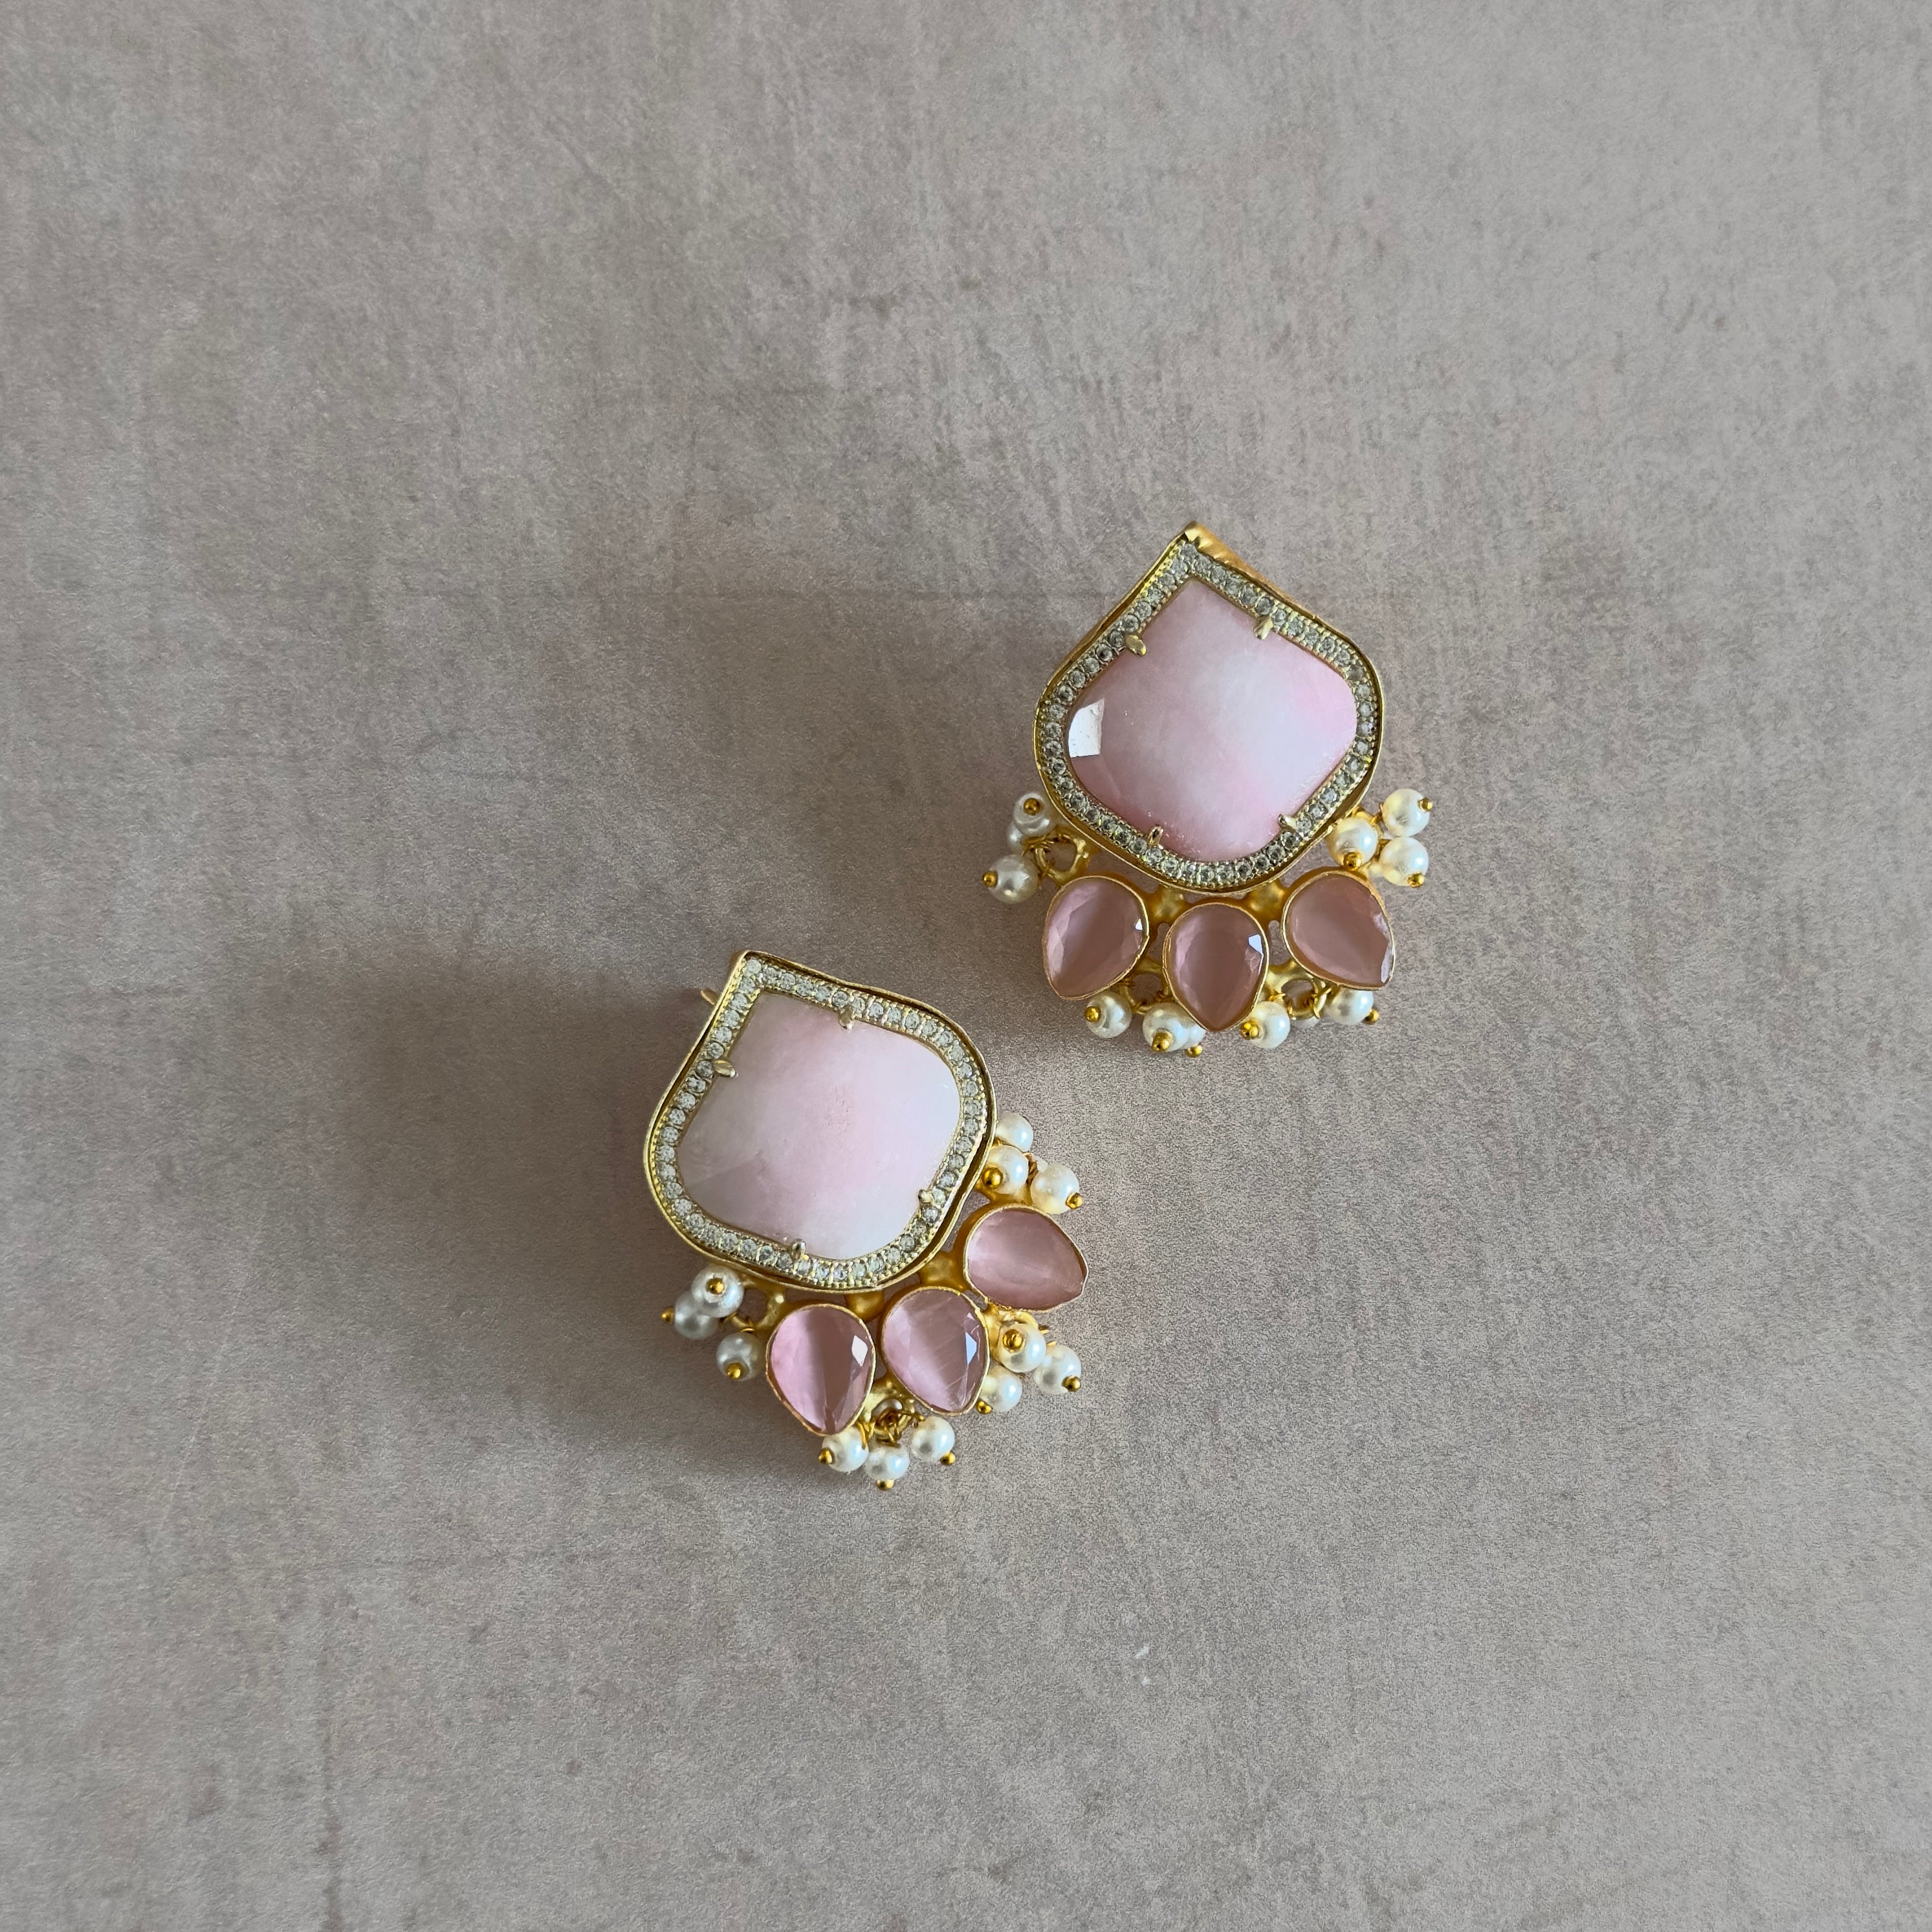 Add a splash of sweetness to your look with our Aria Pink Stud Earrings! These sherbet pink studs are a classic addition to any outfit, perfect for adding a pop of color. Get ready to stand out with these playful earrings!